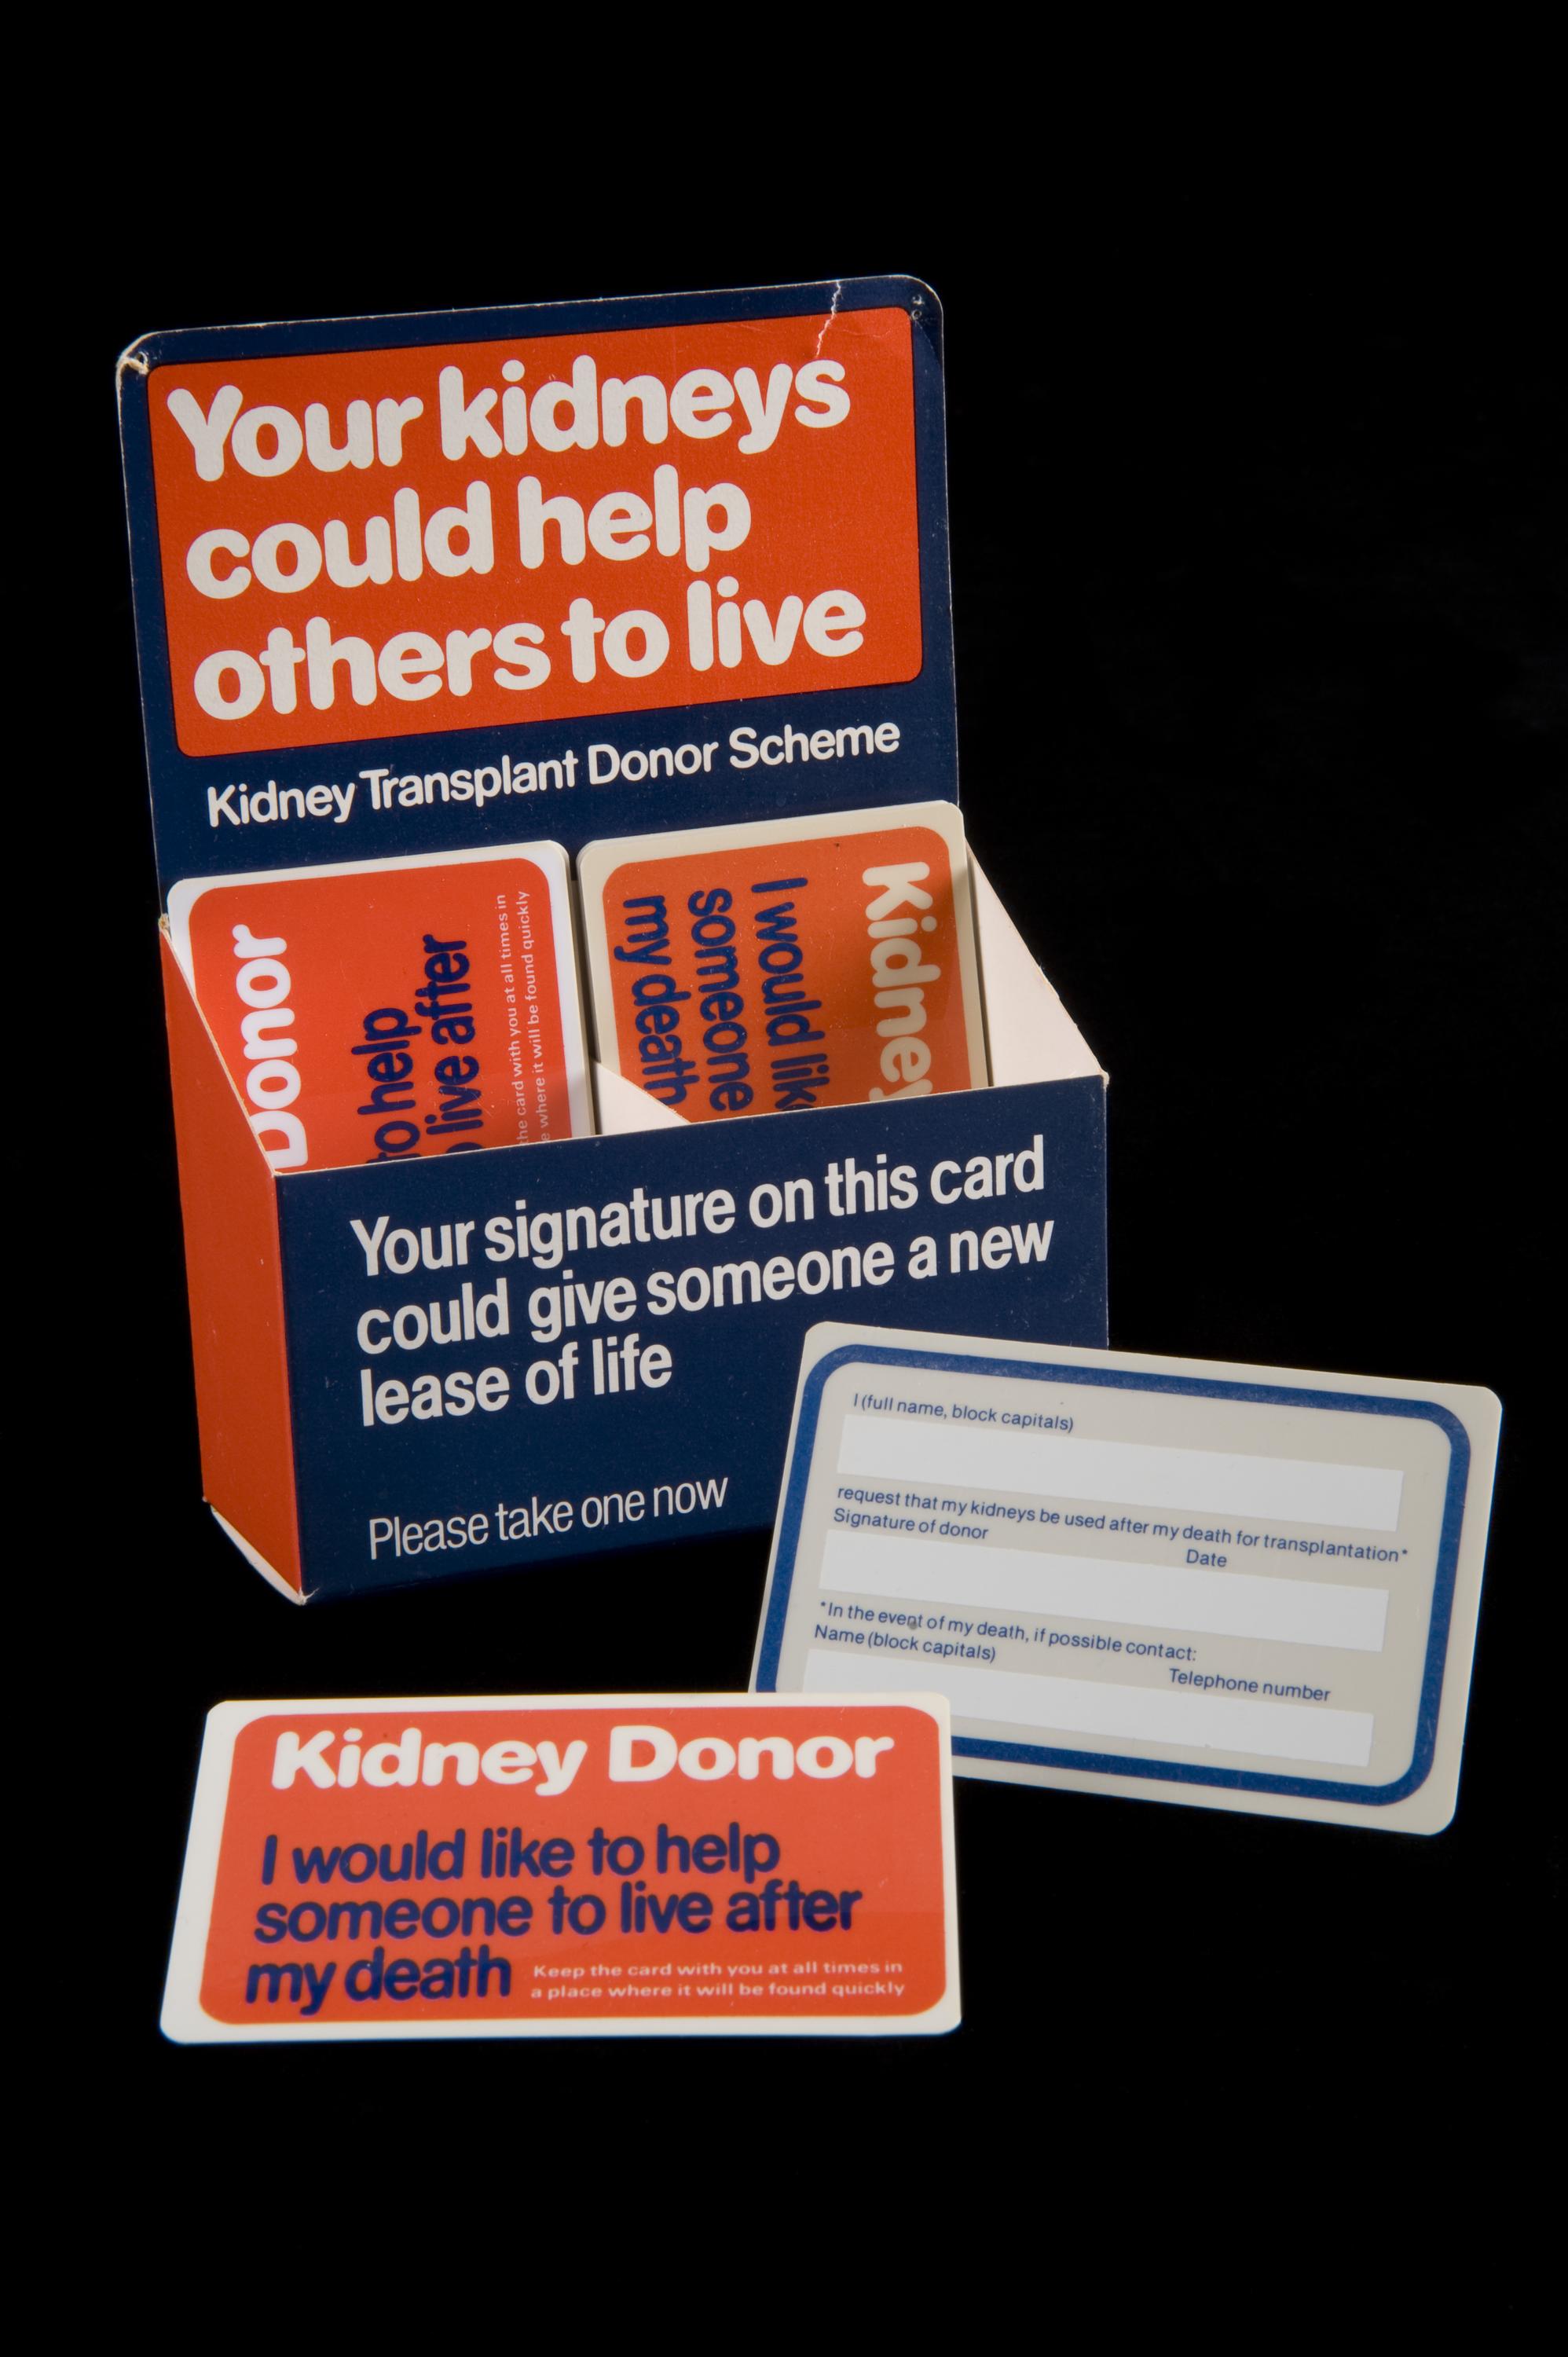 Kidney Donor Cards, 1971-1981